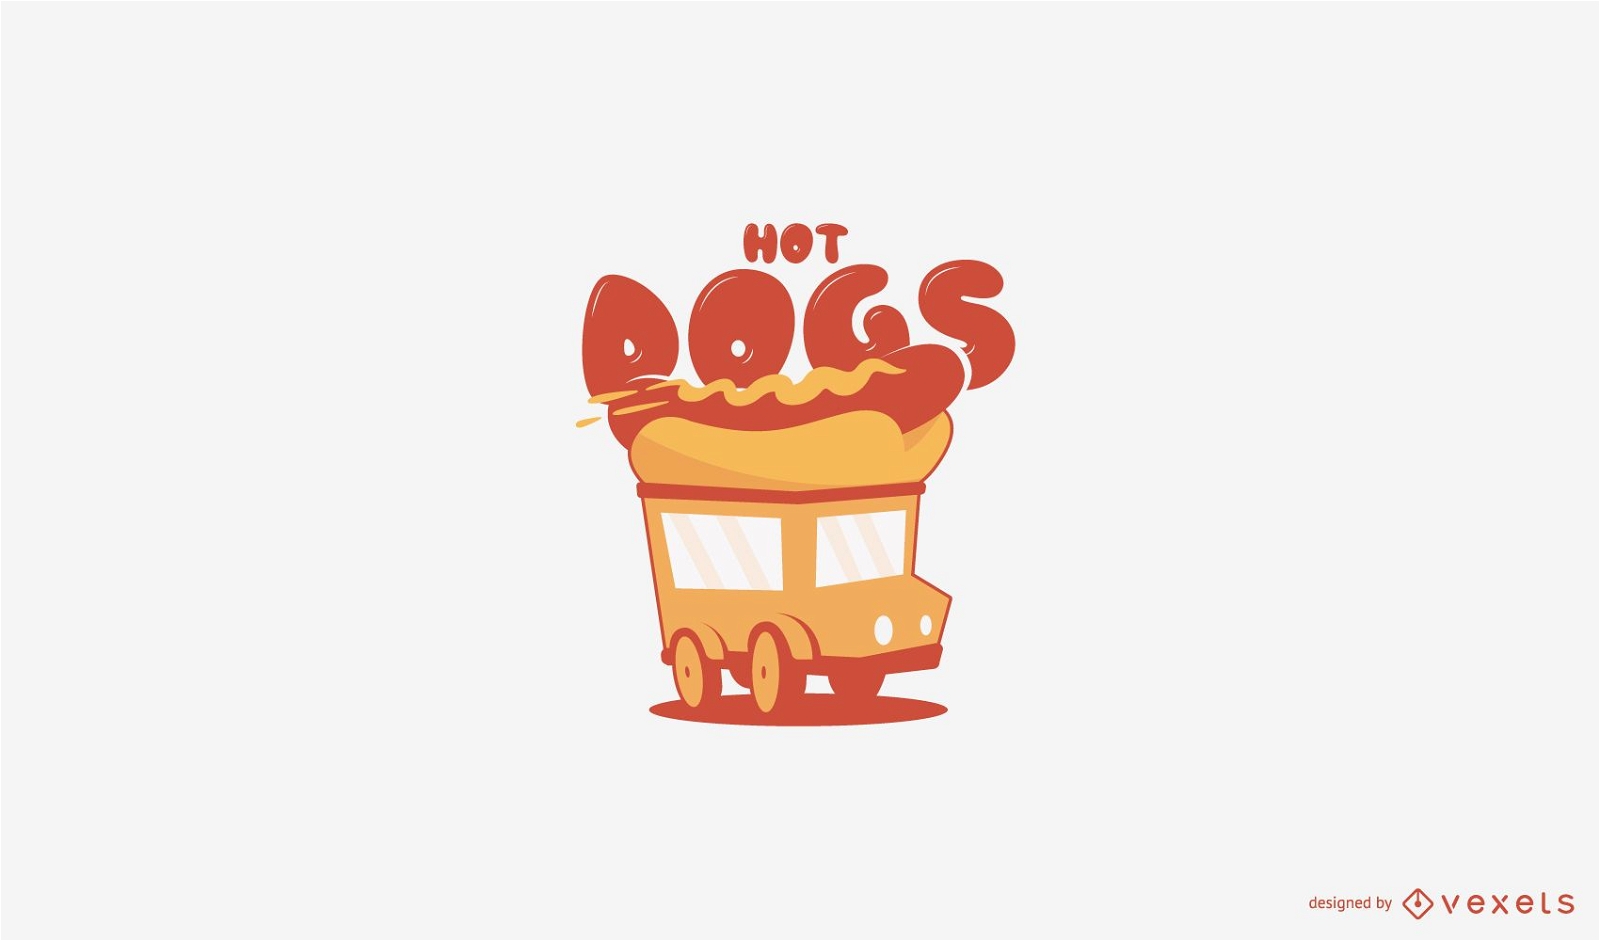 Hot dogs food truck logo template